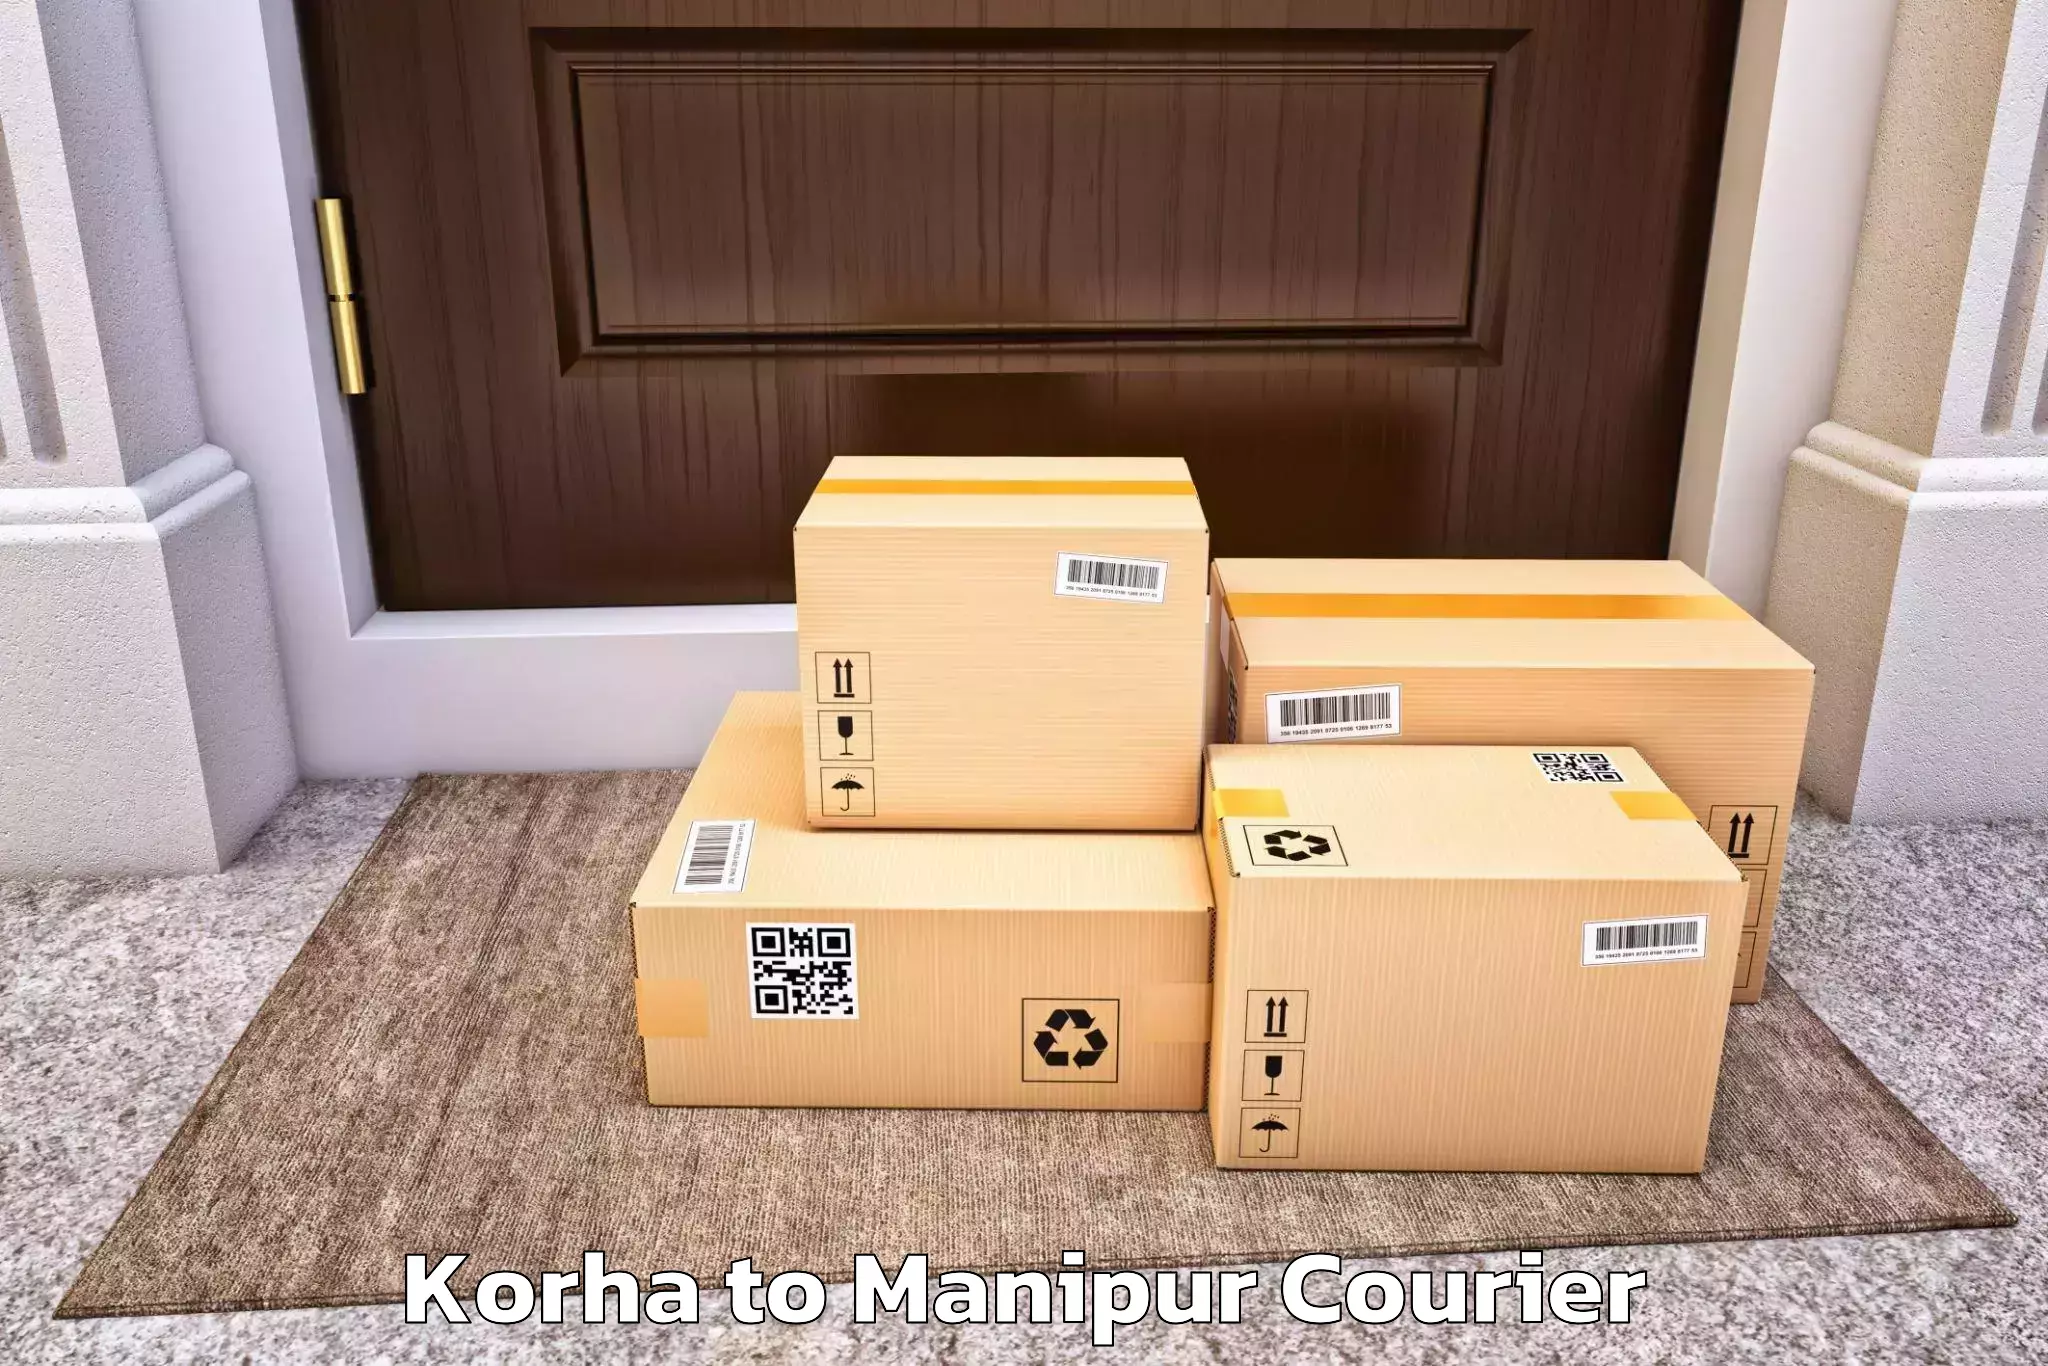 Home relocation experts Korha to Manipur